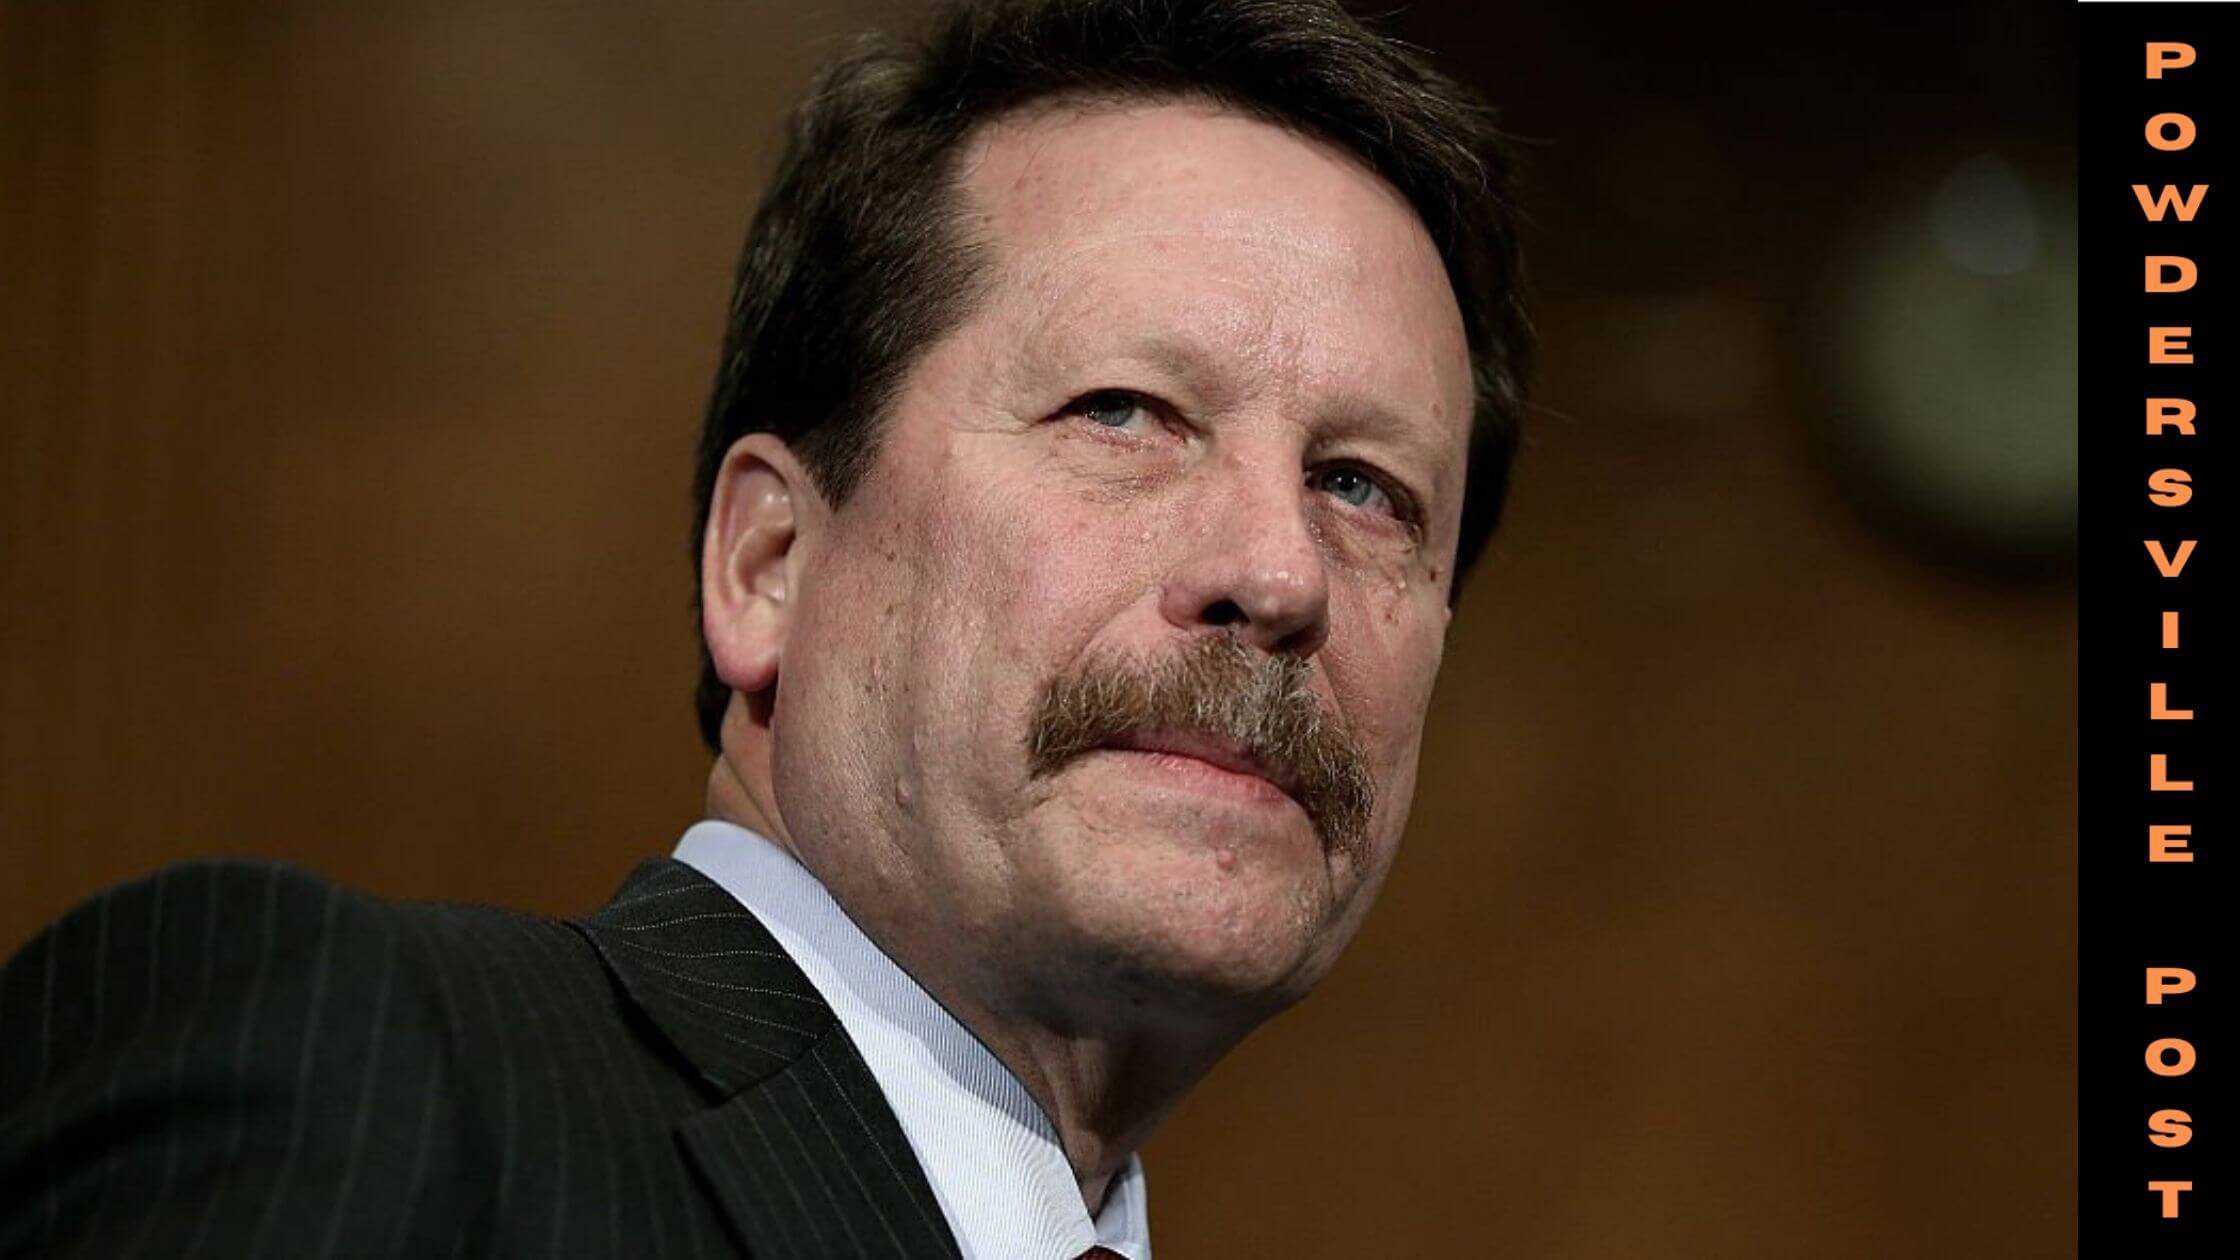 The New Chief Of FDA - Dr. Robert Califf, After A Tight Vote